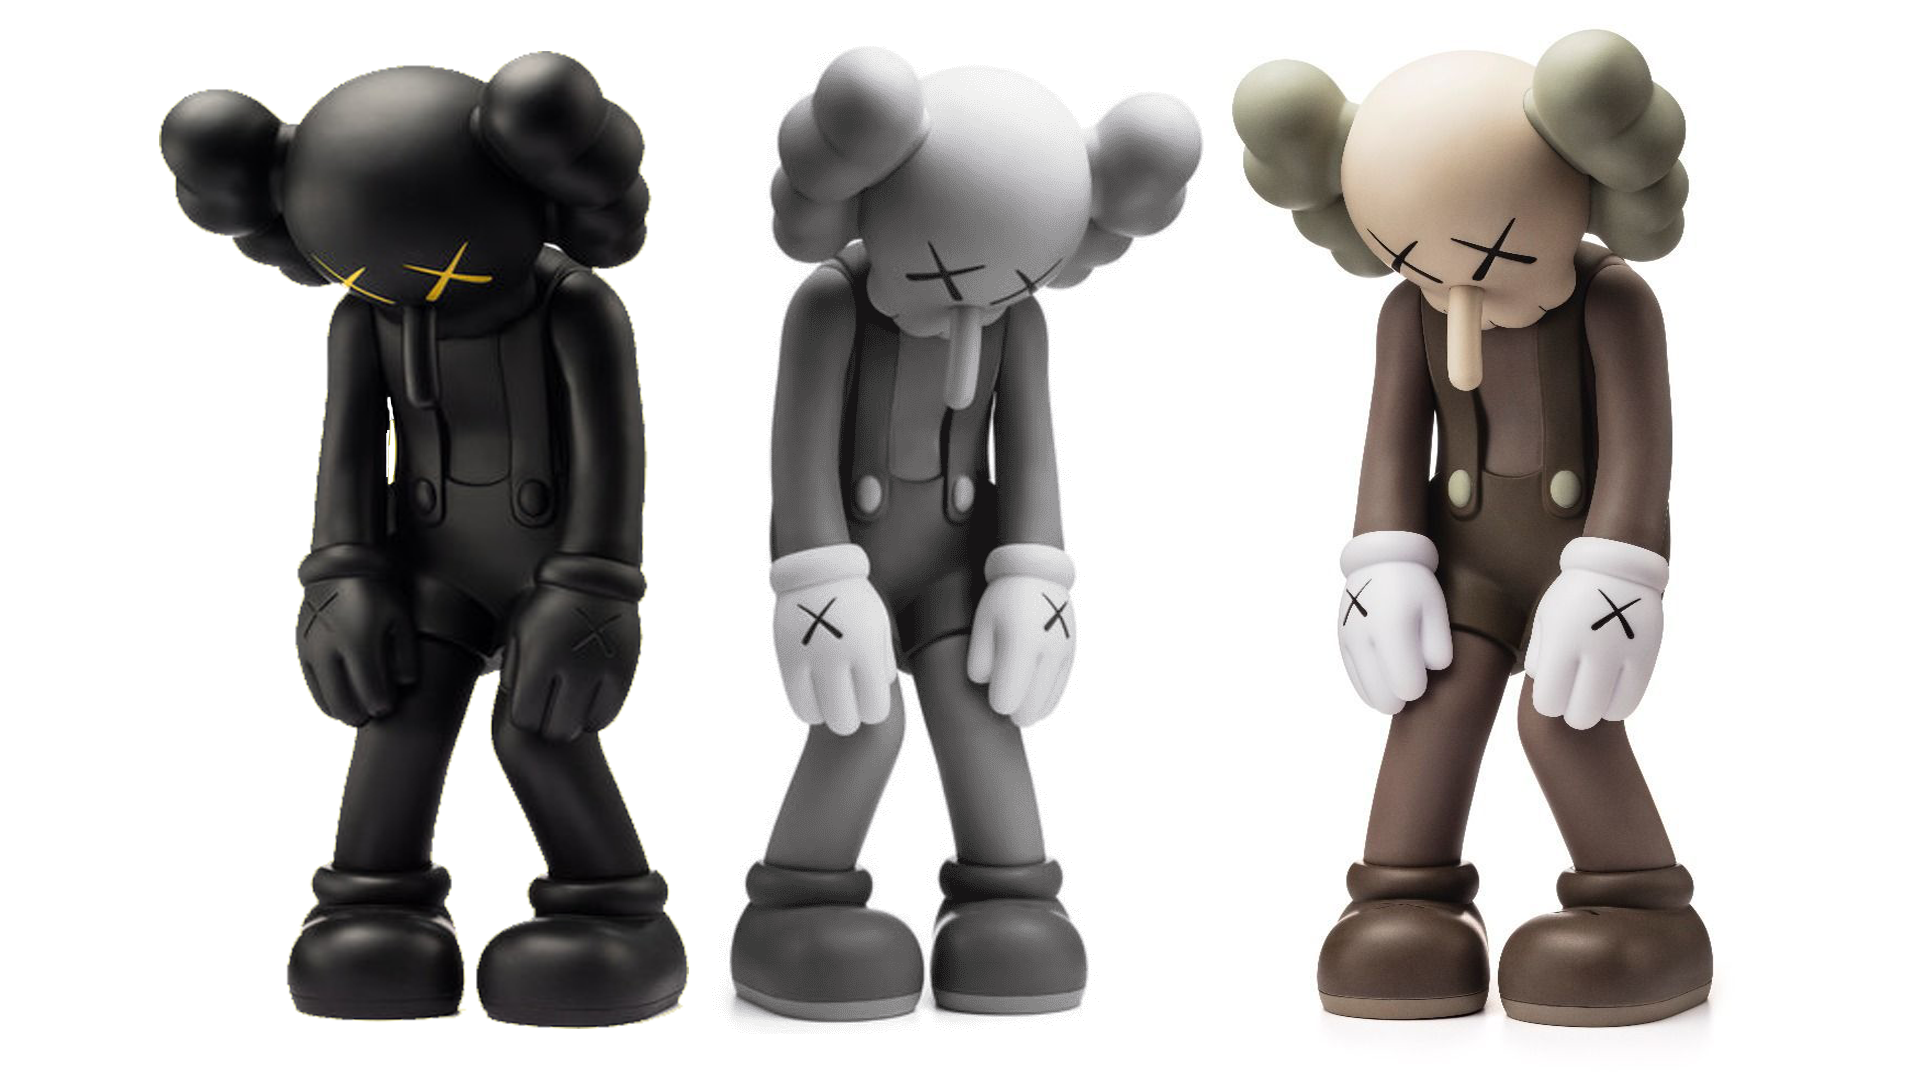 KAWS Small Lie Full Set by Kaws from Eben Contemporary   Global